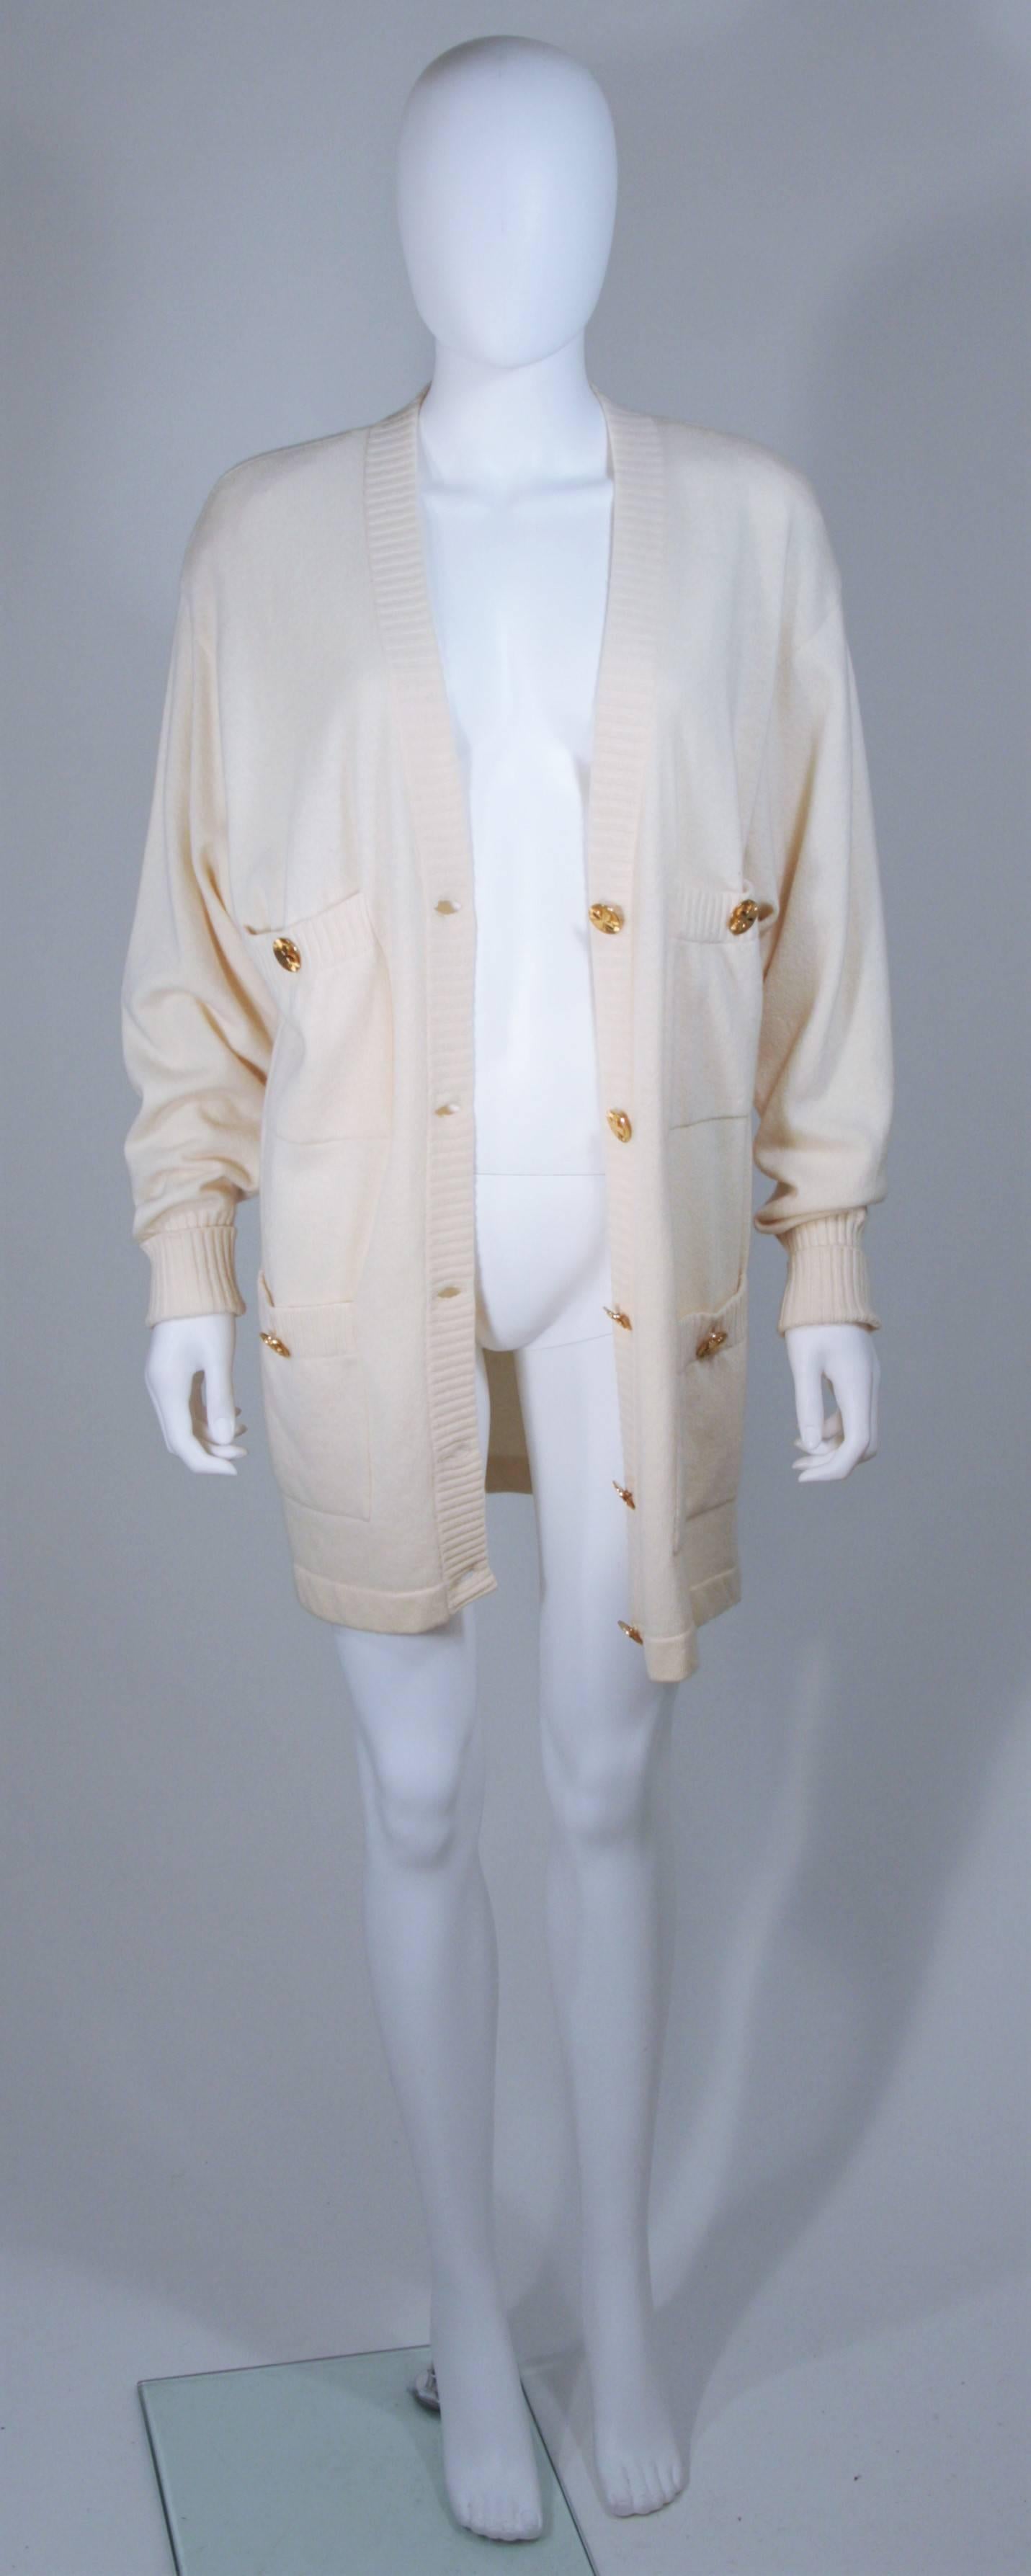 Women's CHANEL Cream Cashmere Cardigan with Gold Buttons Size 36